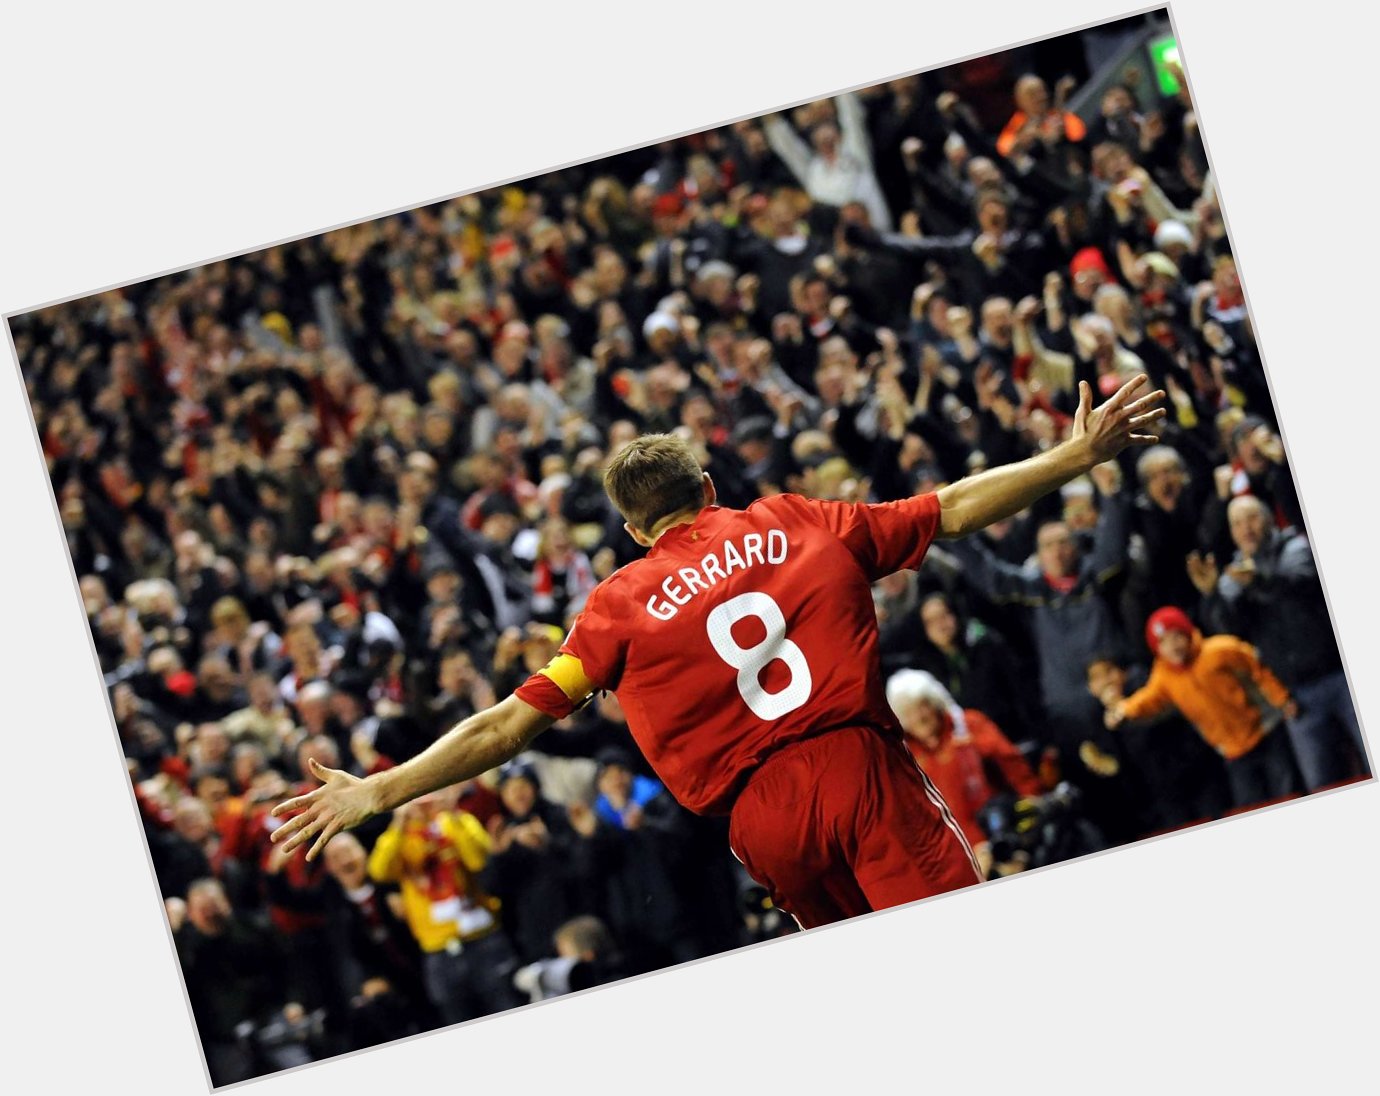 We would like to wish a happy birthday to the legendary Steven Gerrard, Captain Fantastic   